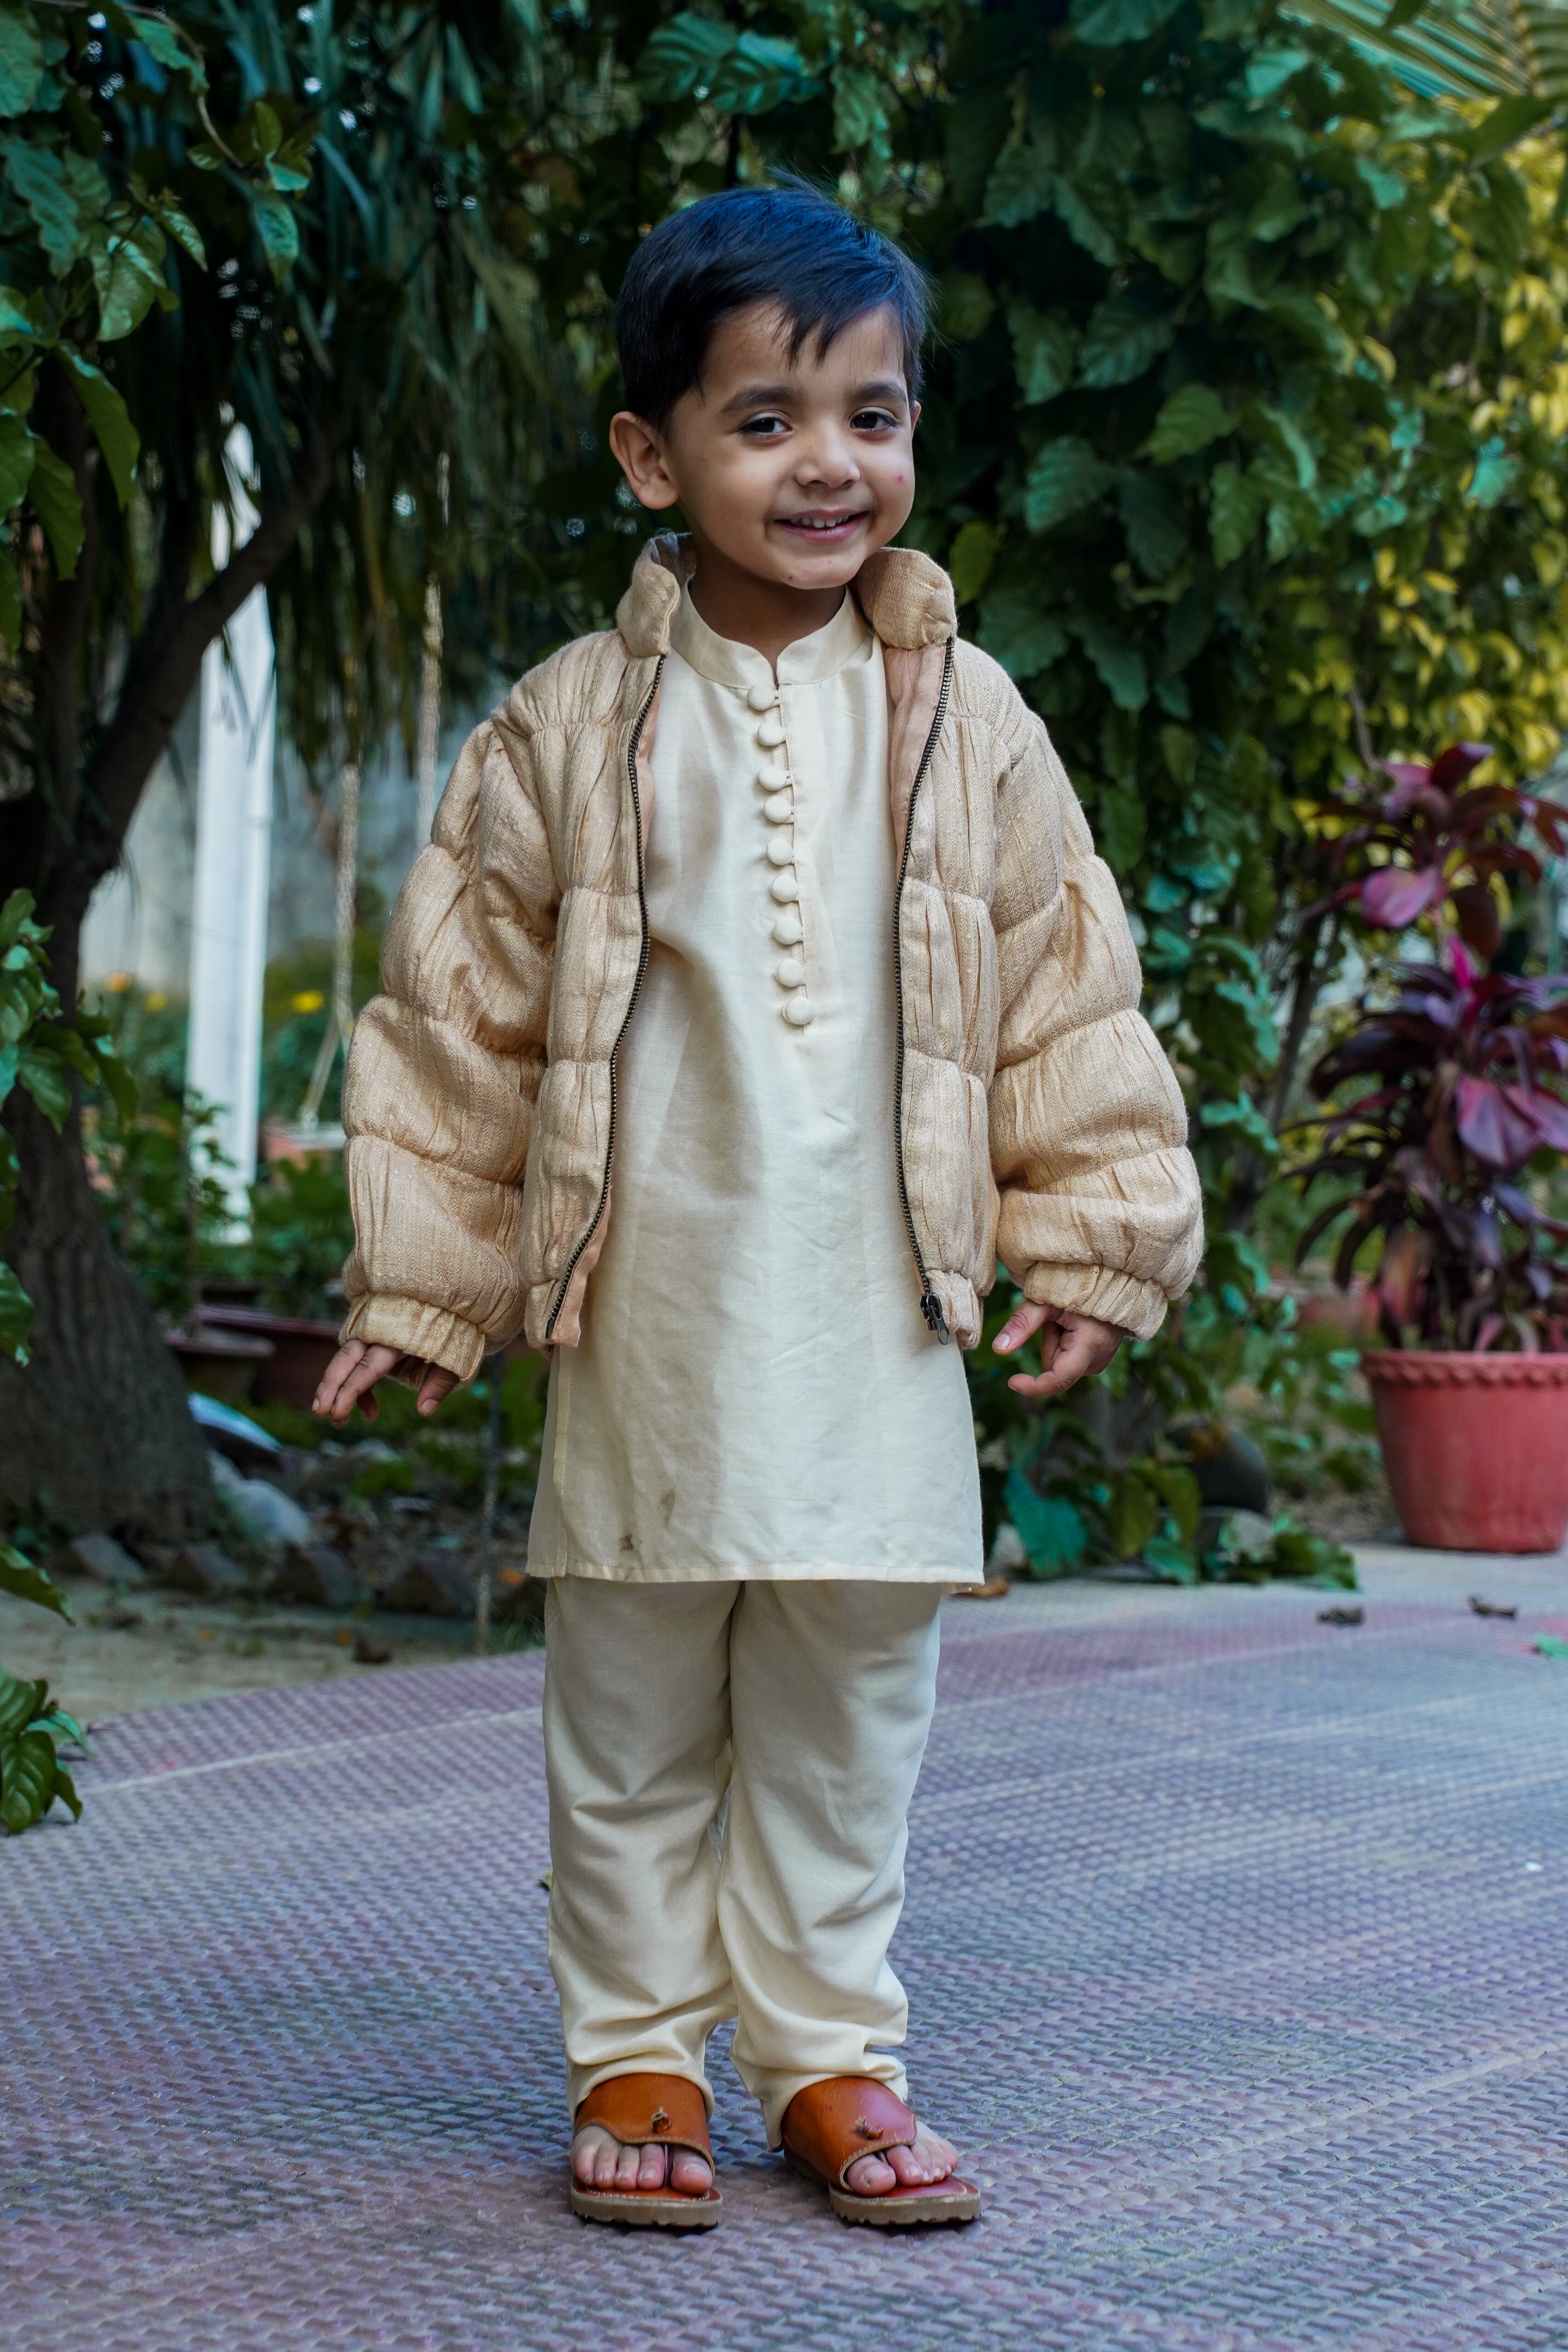 Kids ethnic wear: Kurta pajama with jacket, featuring trendy designs for weddings and formal events, ideal for children's fashion.